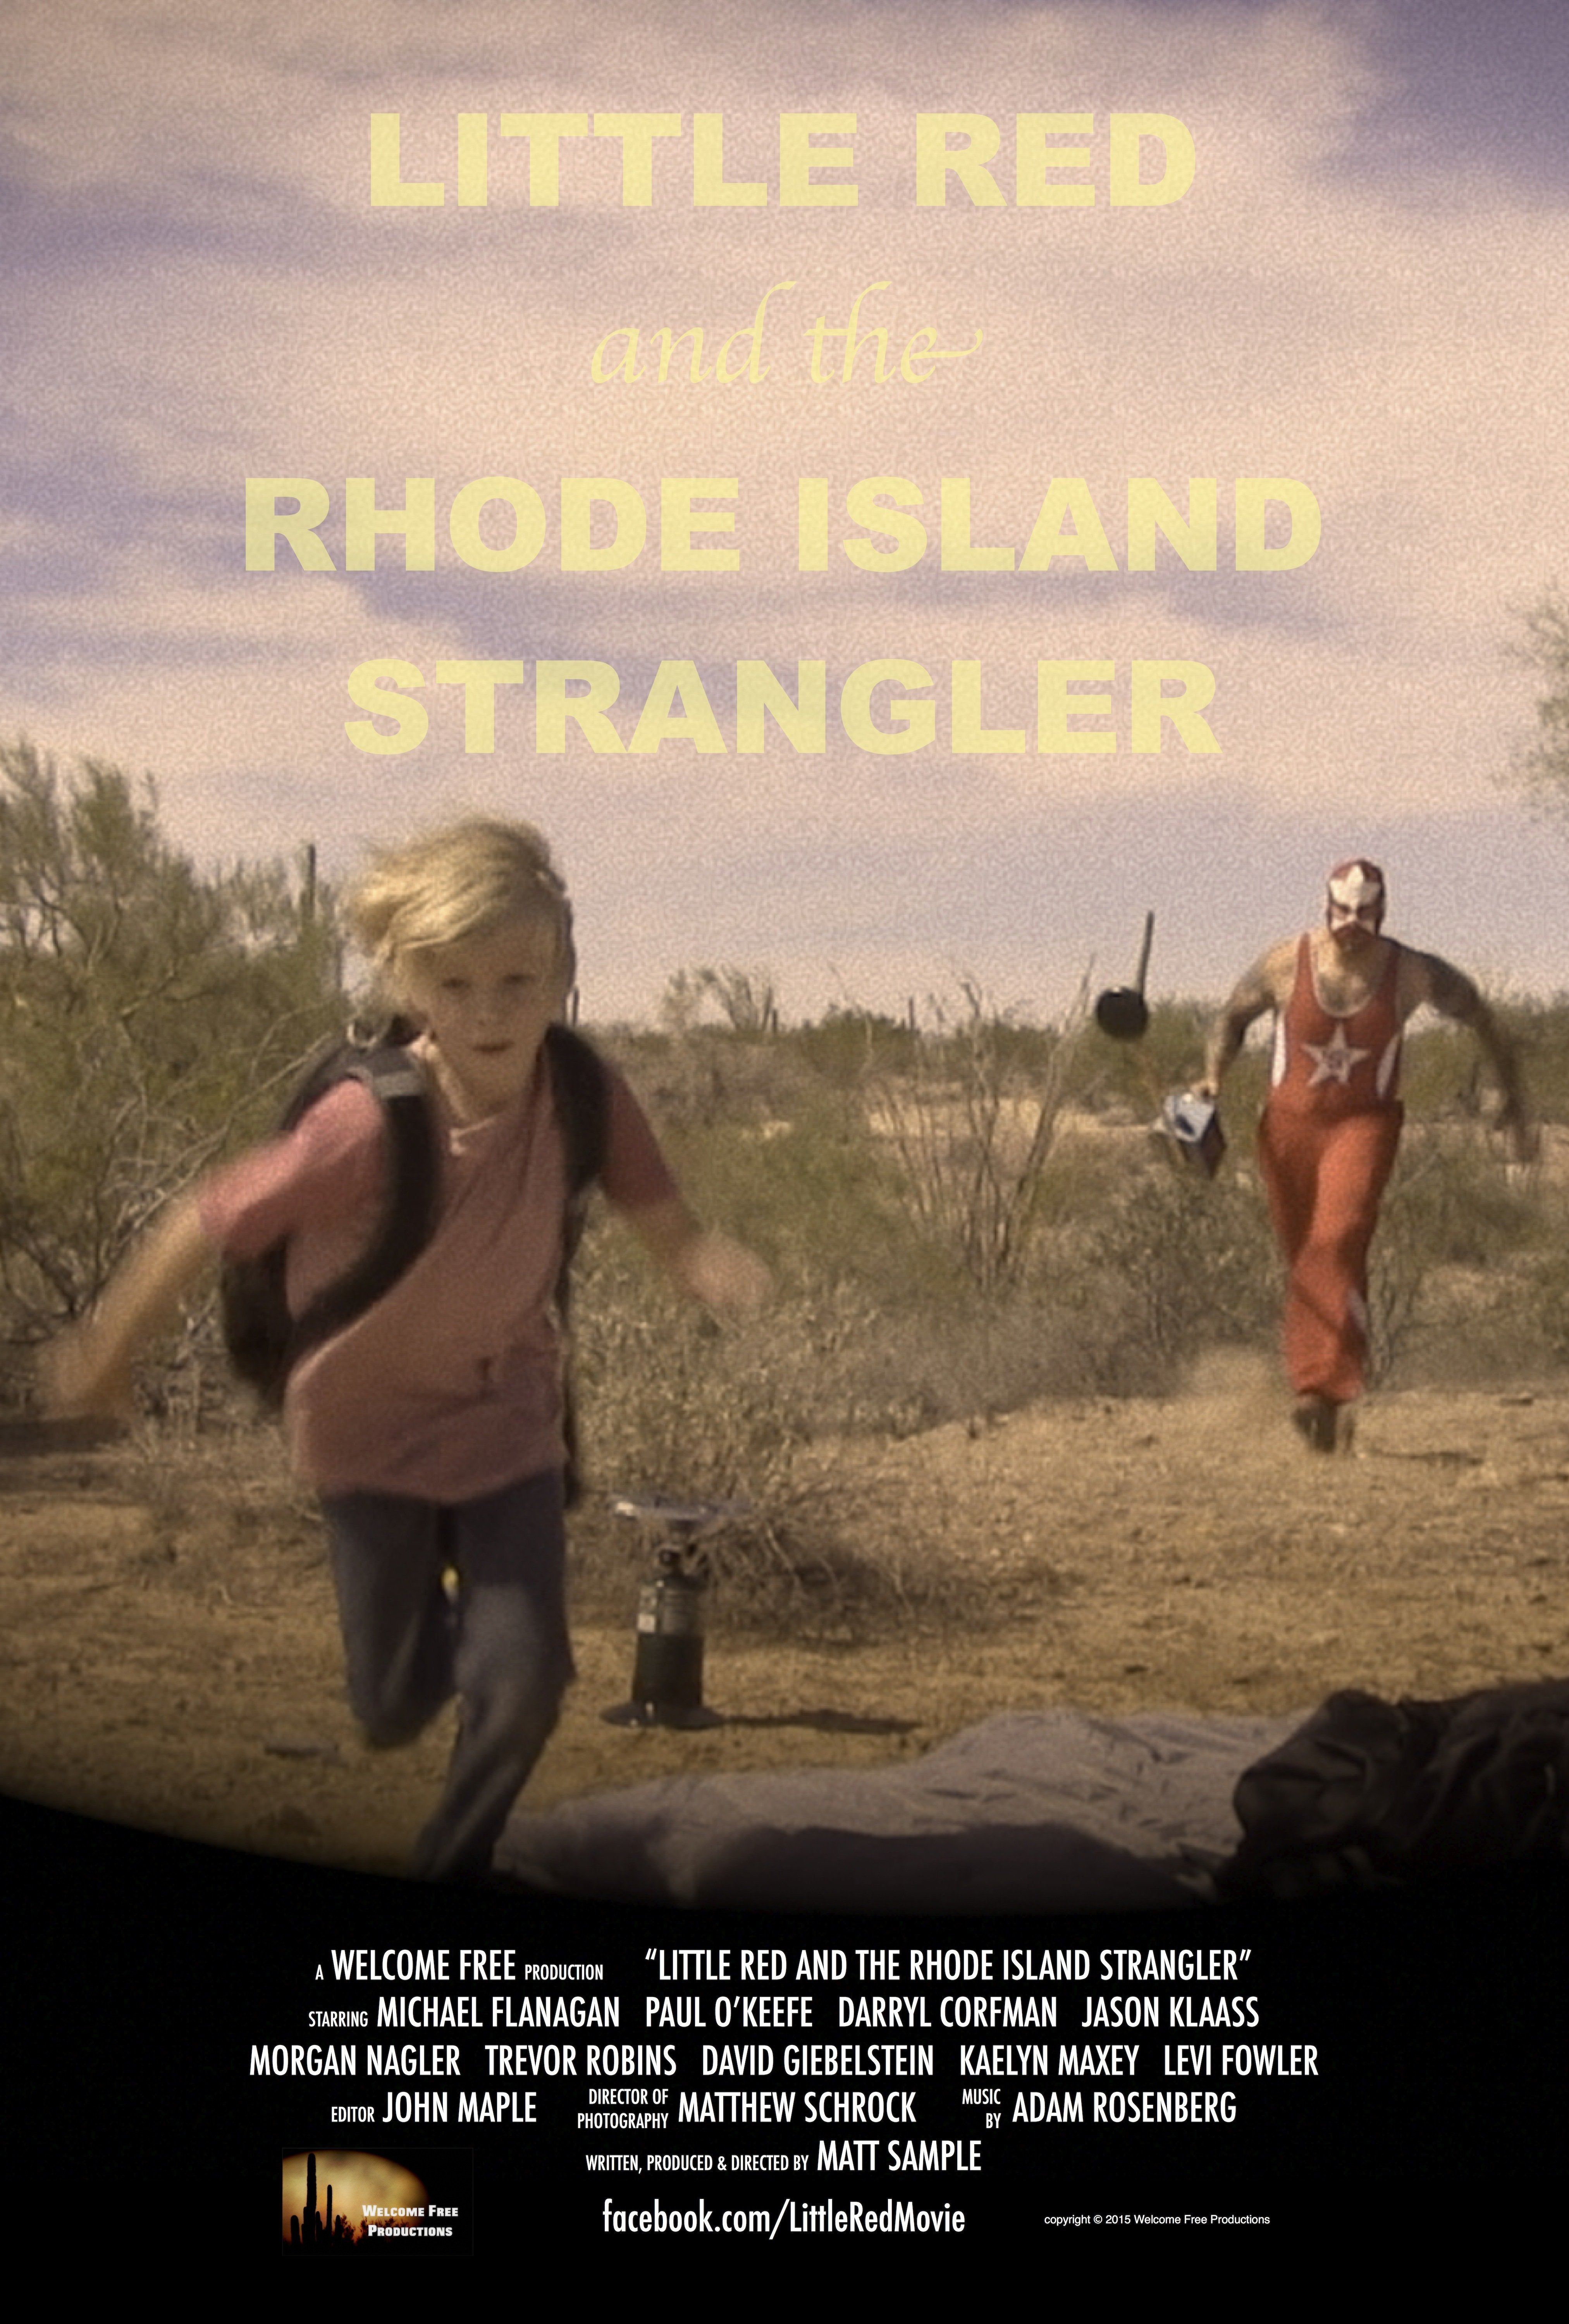 Michael P. Flanagan Jr. in Little Red and the Rhode Island Strangler (2015)